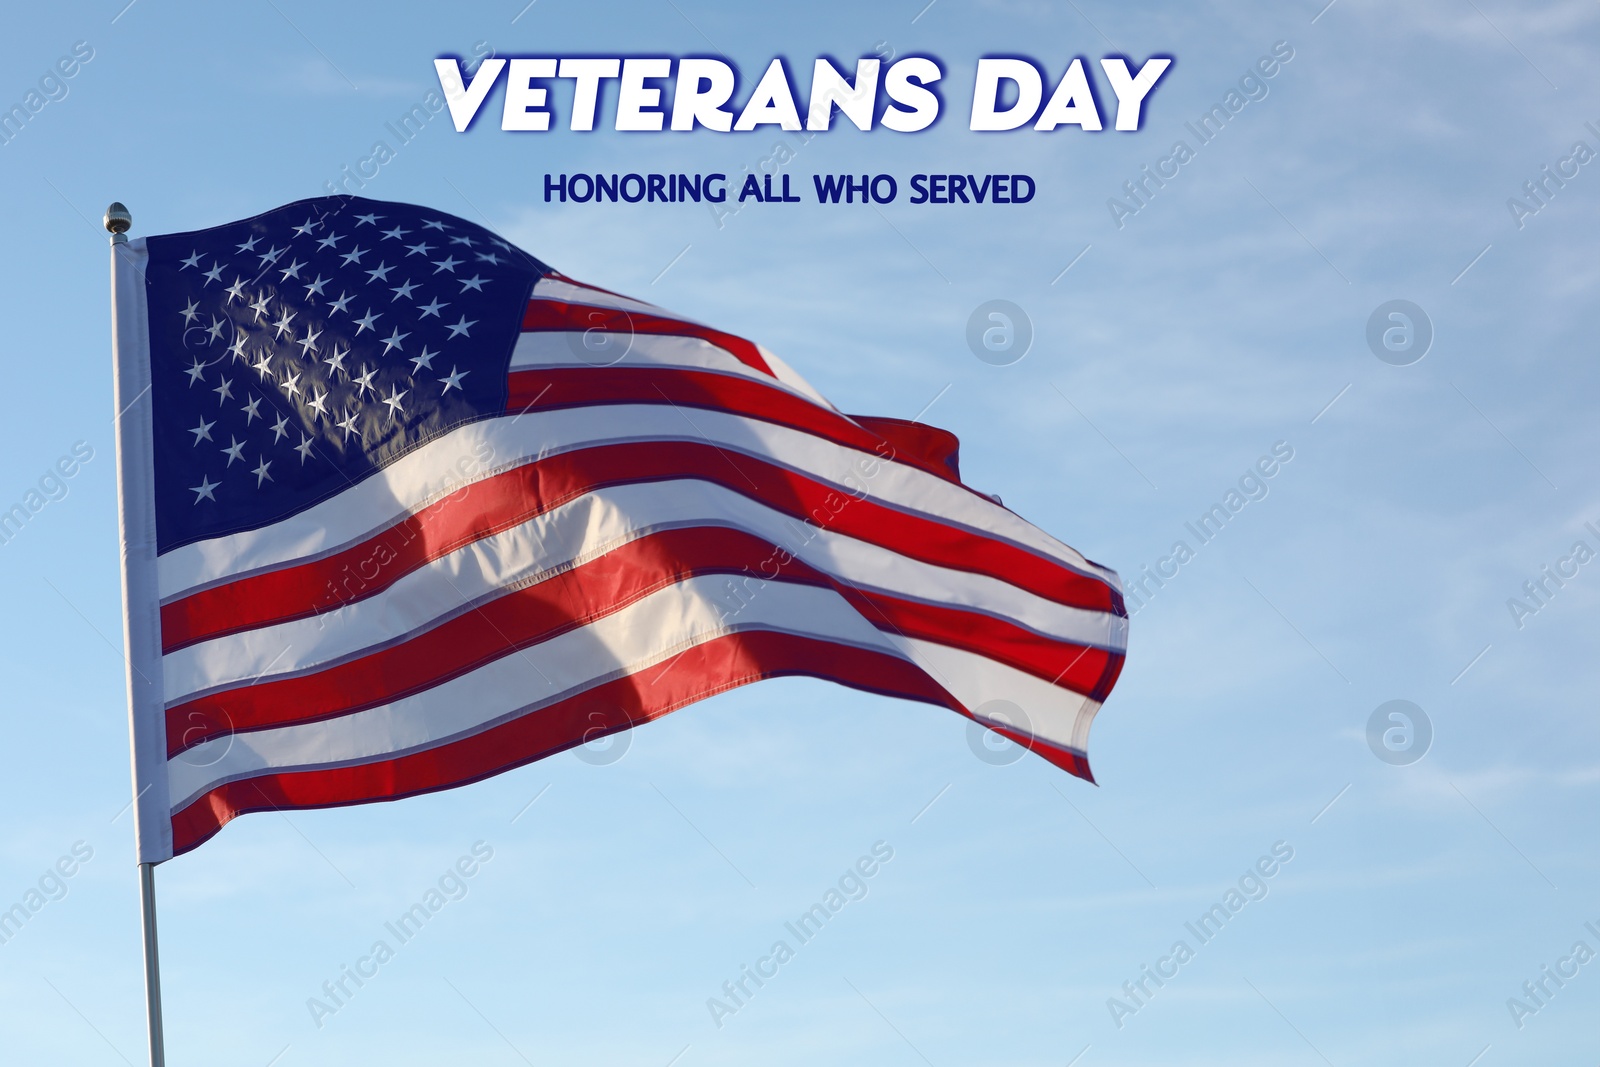 Image of Veterans day. Honoring all who served. American flag against blue sky